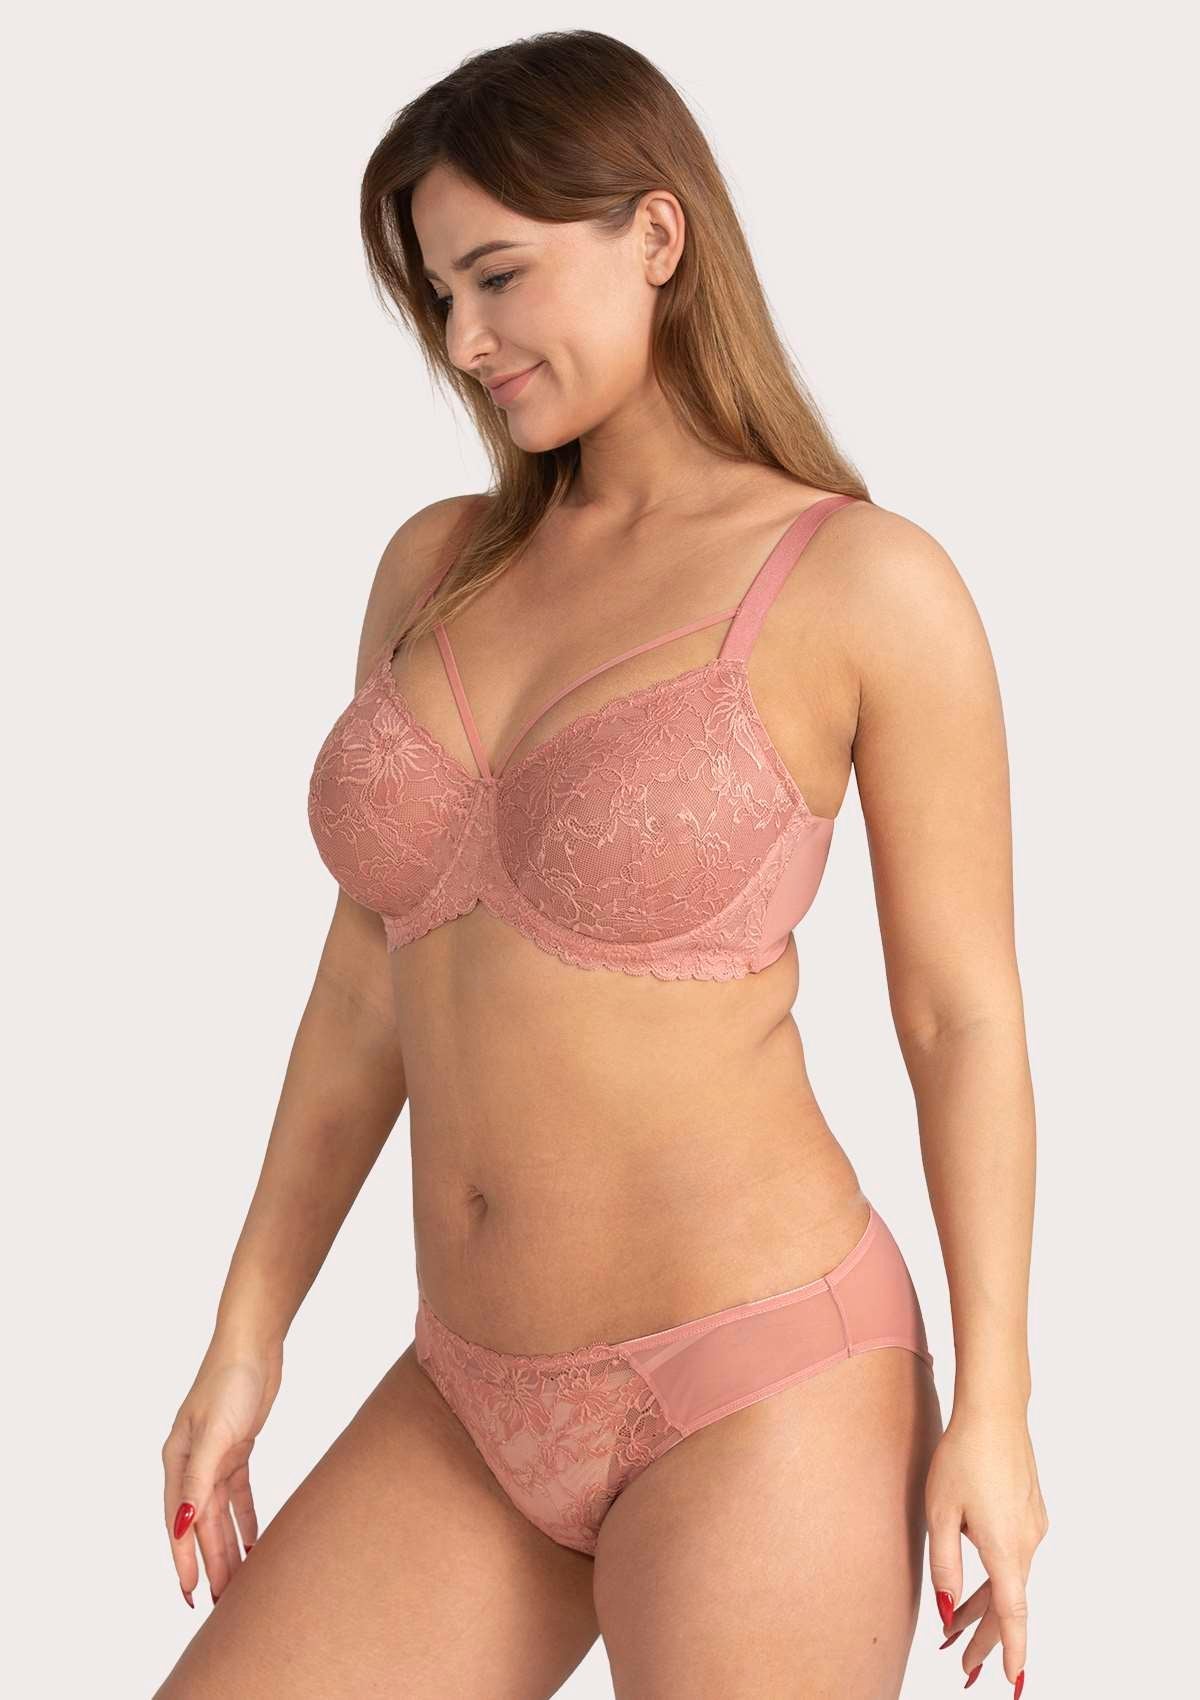 HSIA Pretty In Petals Lace Bra And Panty Sets: Bra For Big Boobs - Light Coral / 32 / C